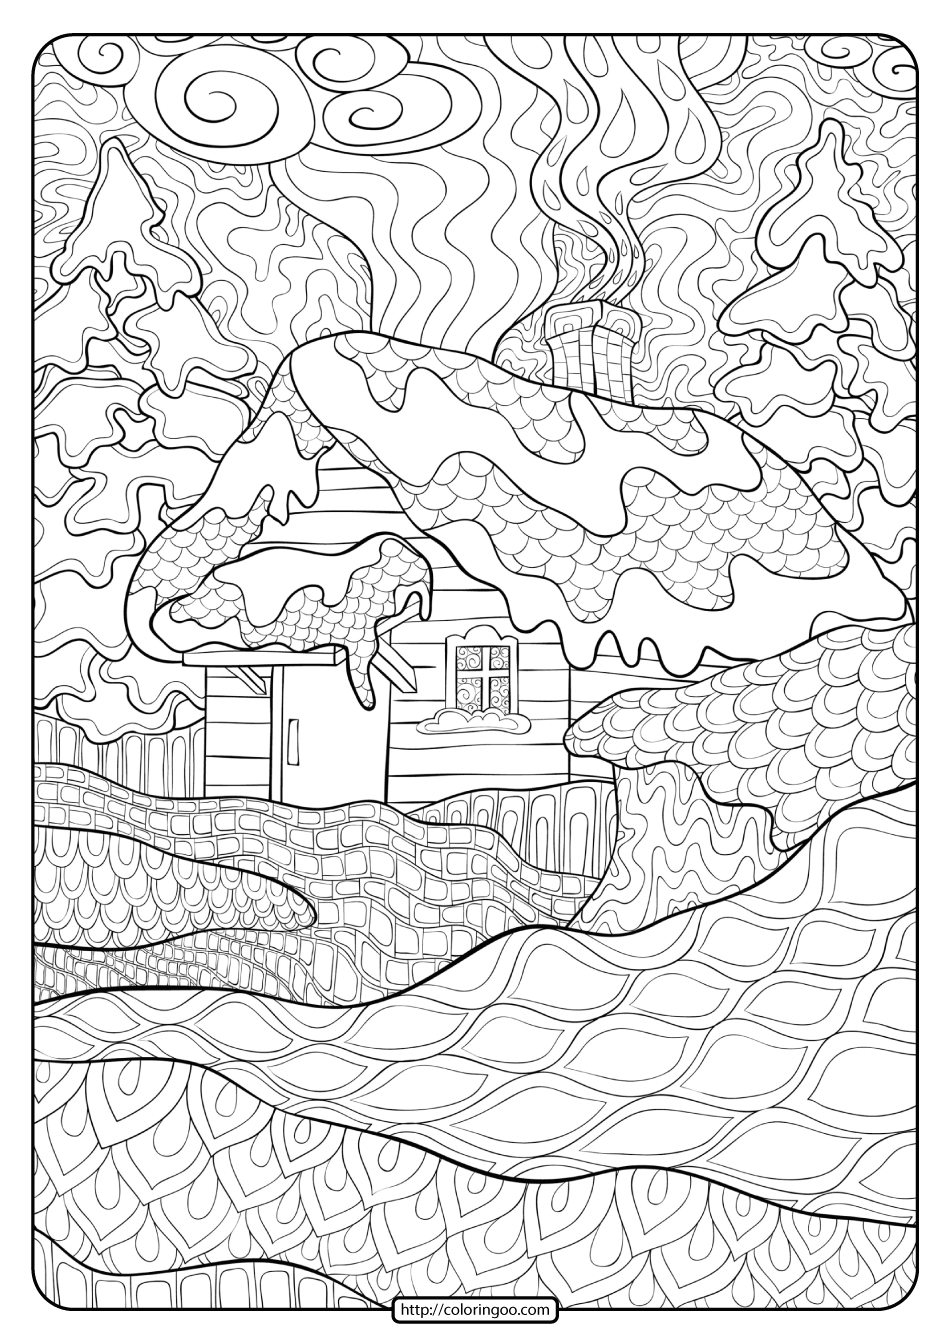 printable zentangle winter cabin coloring pages